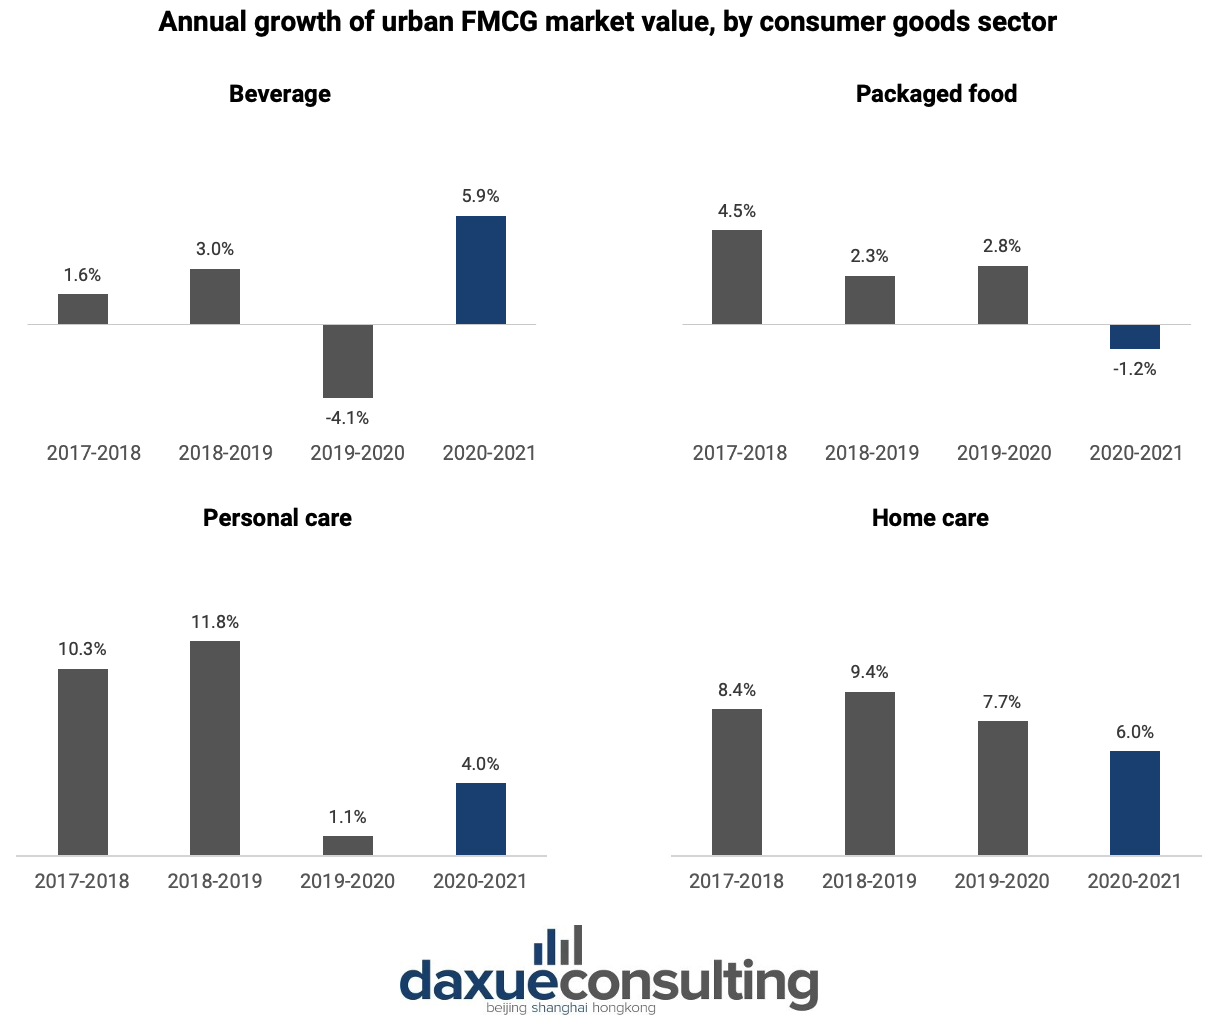 Chinas-FMCG-consumer-goods-sector-annual-growth-value